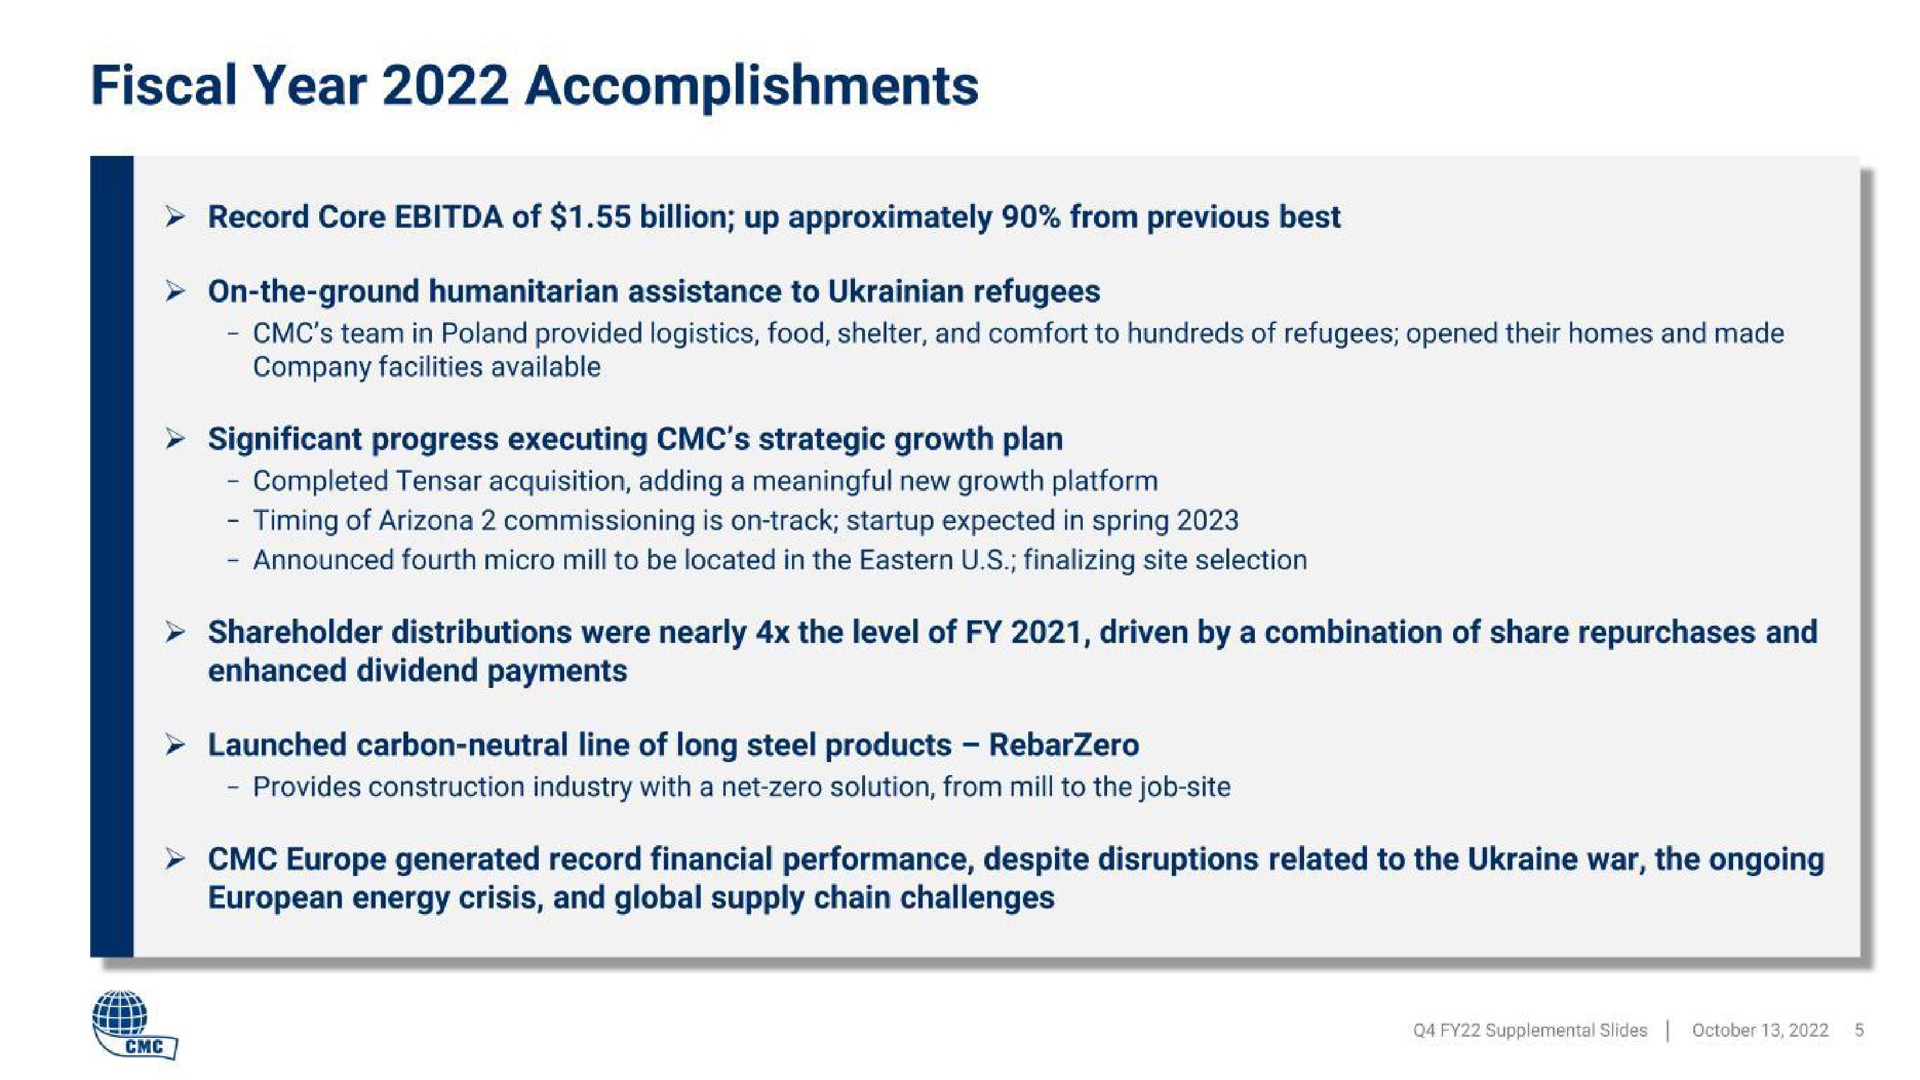 fiscal year accomplishments record core of billion up approximately from previous best on the ground humanitarian assistance to refugees significant progress executing strategic growth plan enhanced dividend payments launched carbon neutral line of long steel products shareholder distributions were nearly the level of driven by a combination of share repurchases and energy crisis and global supply chain challenges generated record financial performance despite disruptions related to the war the ongoing | Commercial Metals Company